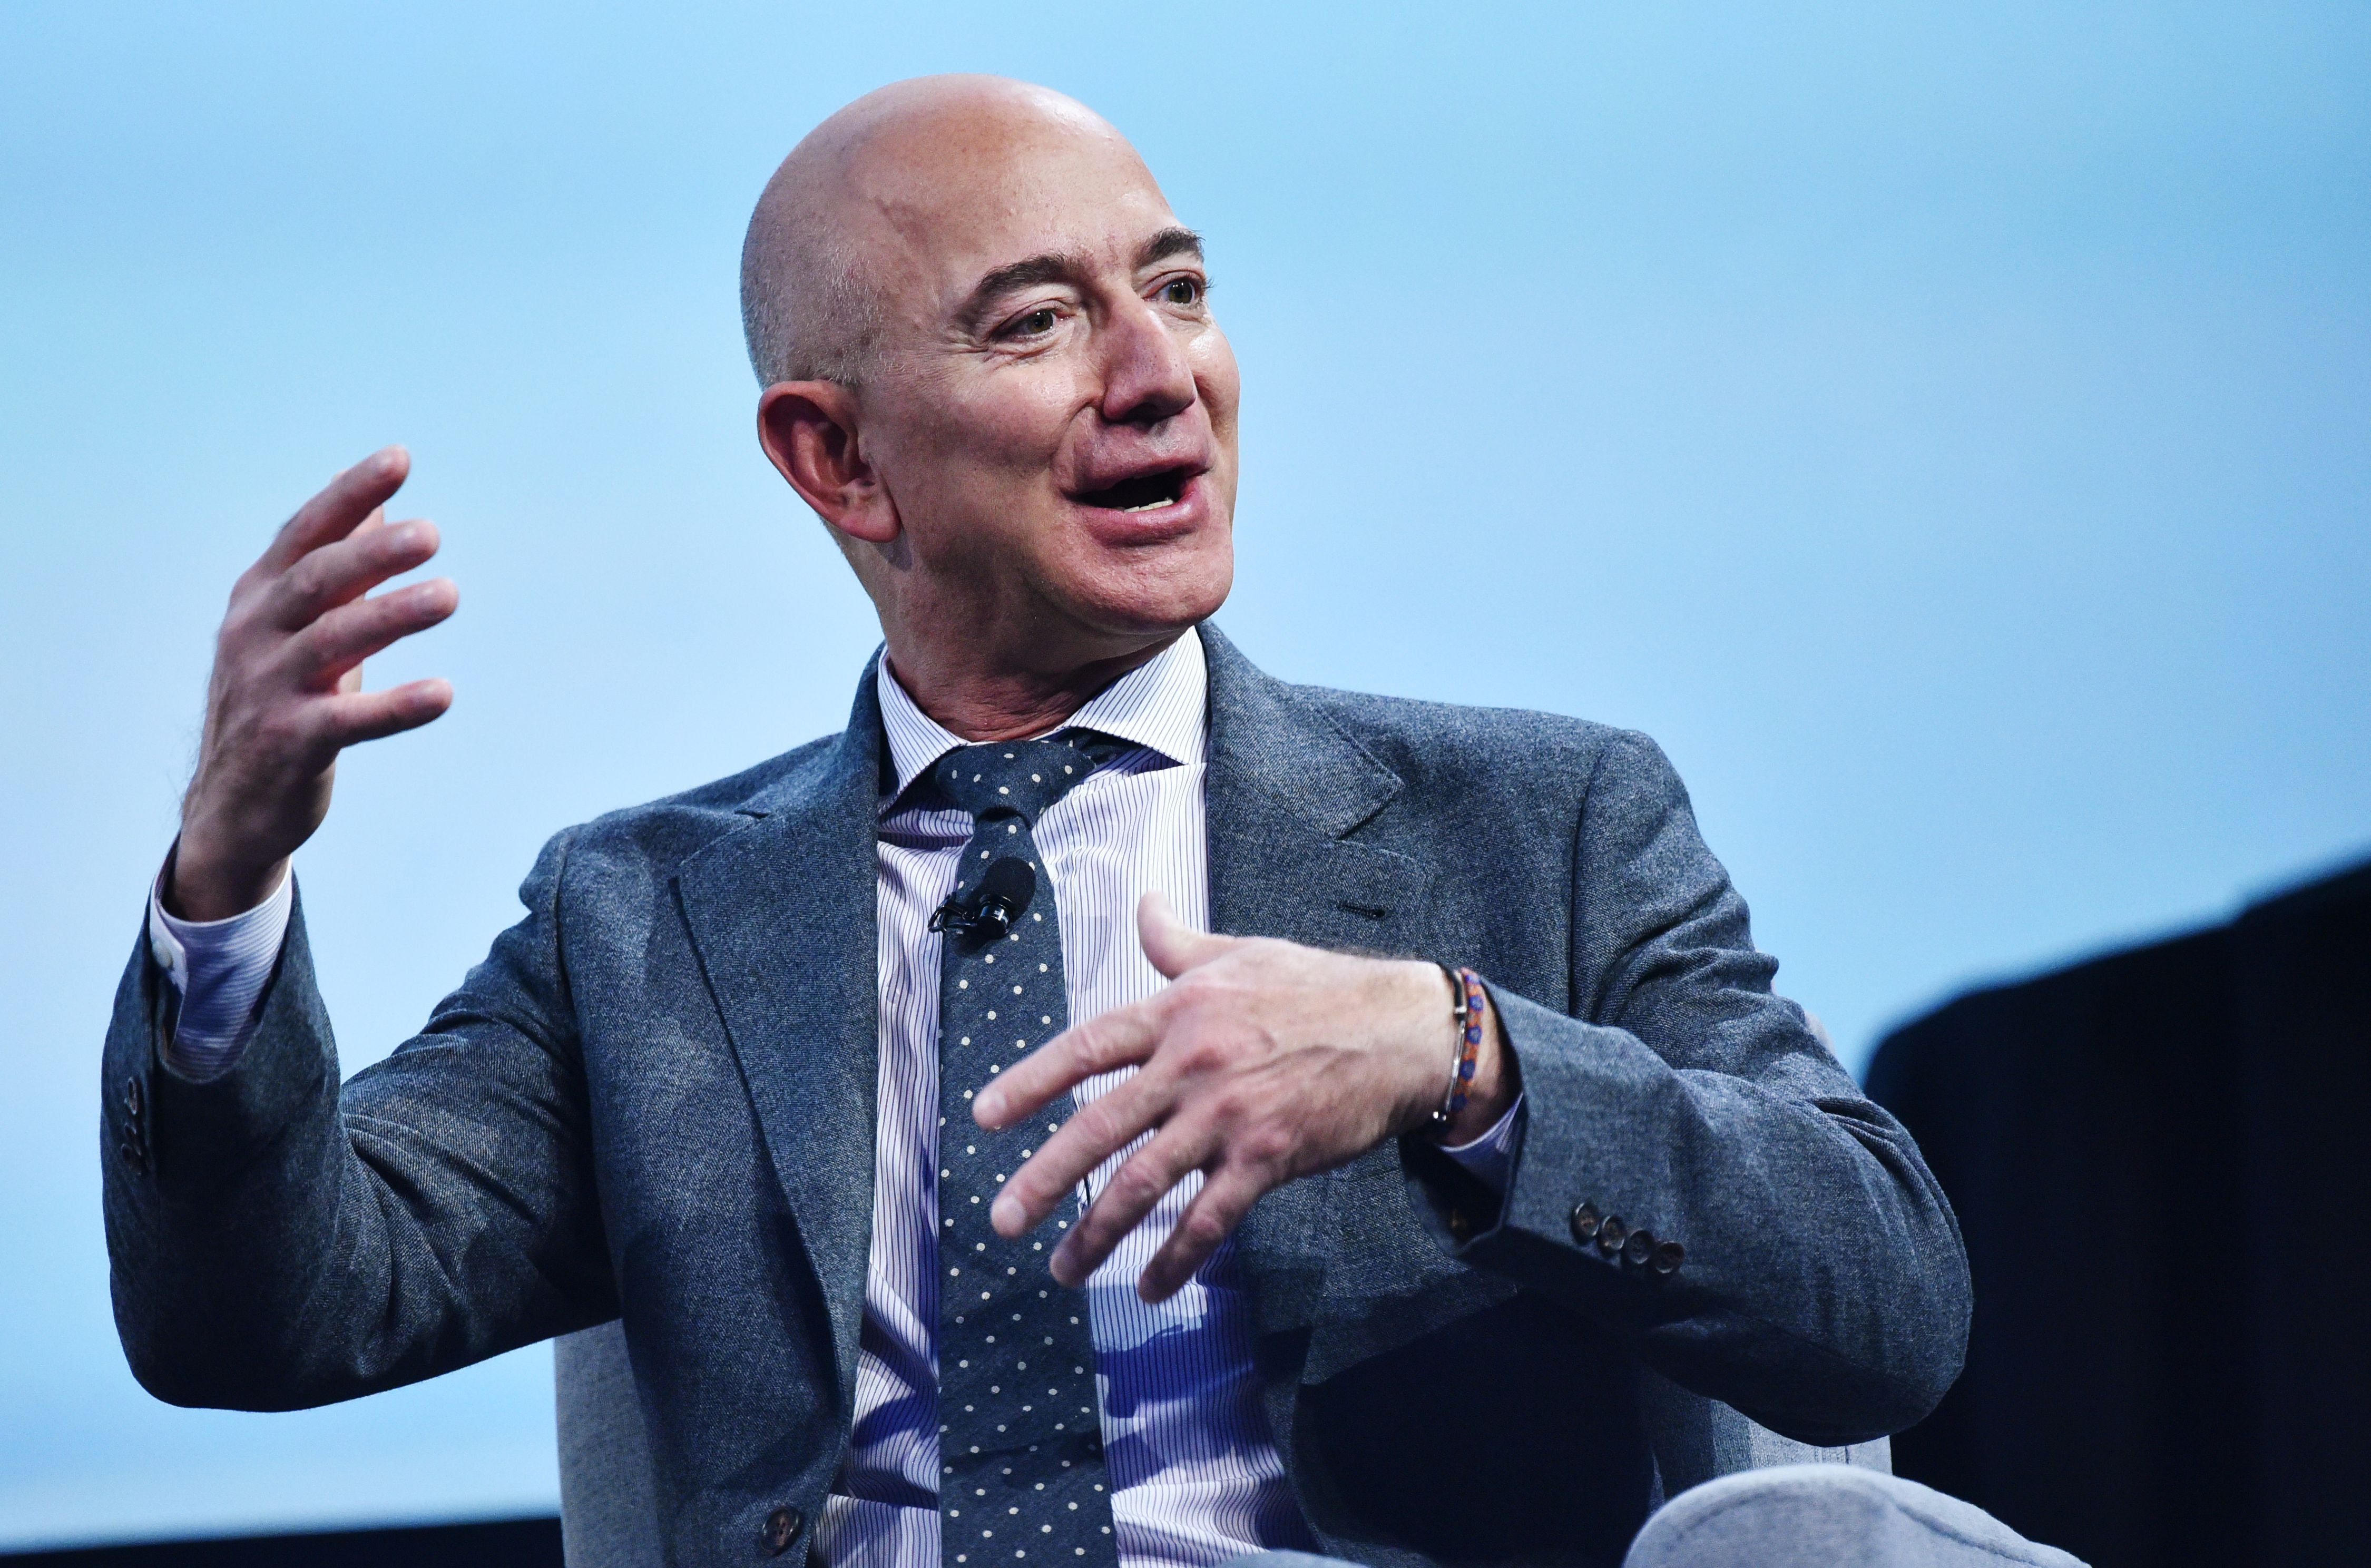 Jeff Bezos signed a contract for millions of dollars to supply tech services to the IDF, the Israeli army.